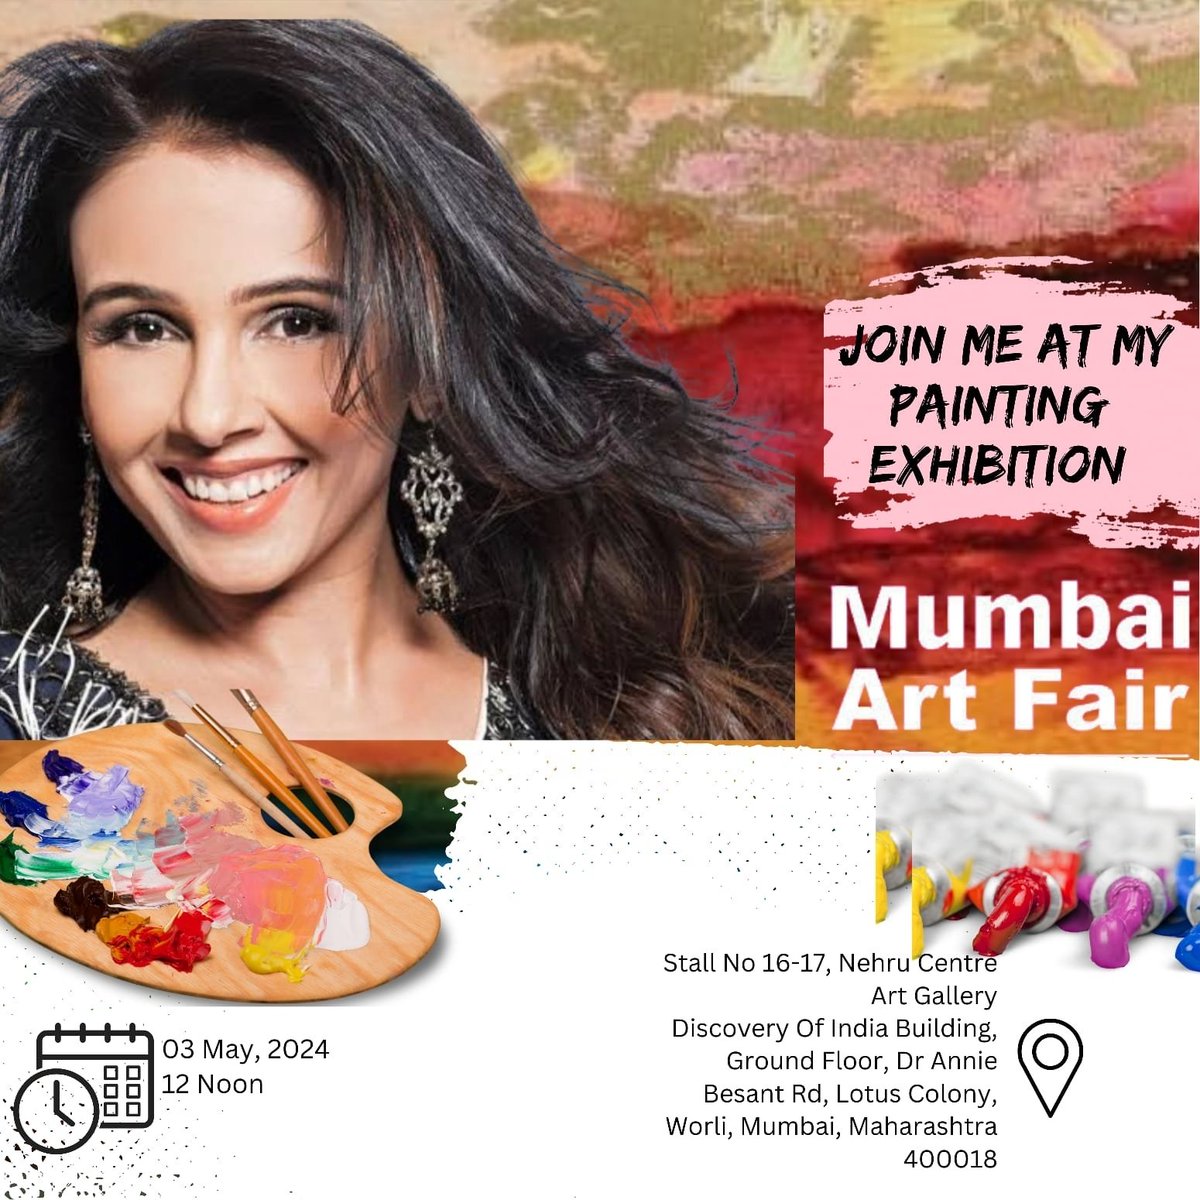 Mumbai peeps do come.
Exhibition is on for 3 days